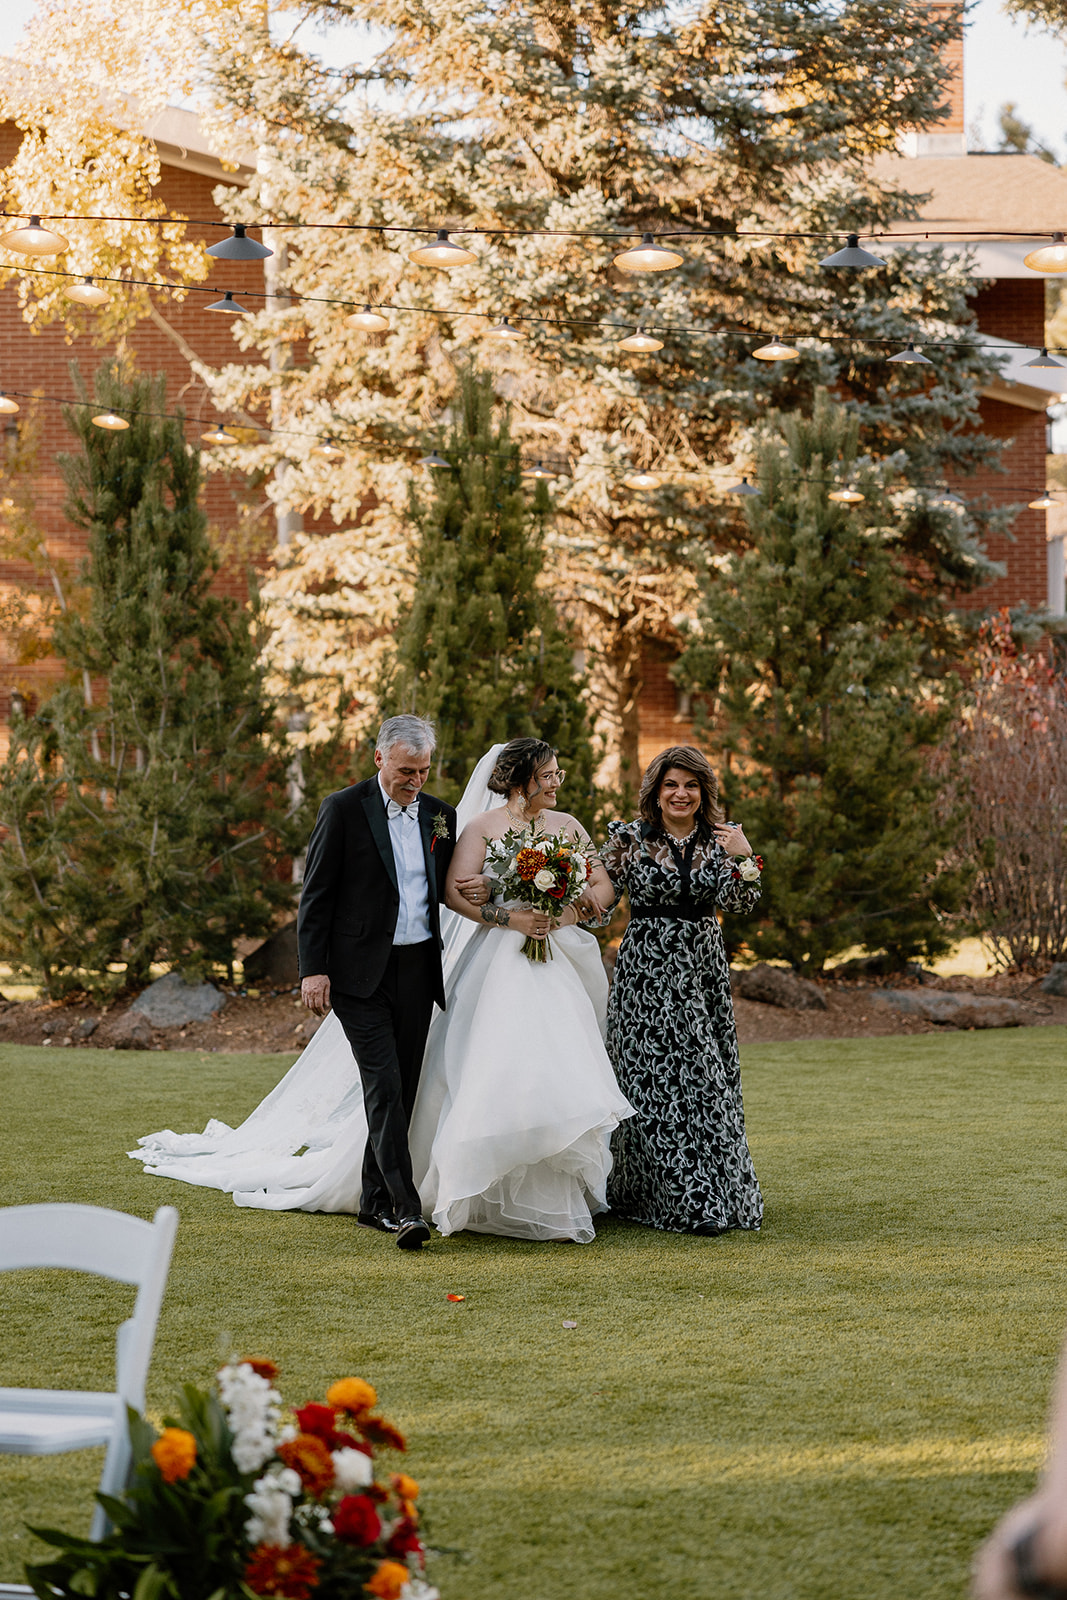 Bride gets walked into her ceremony by her father and mother